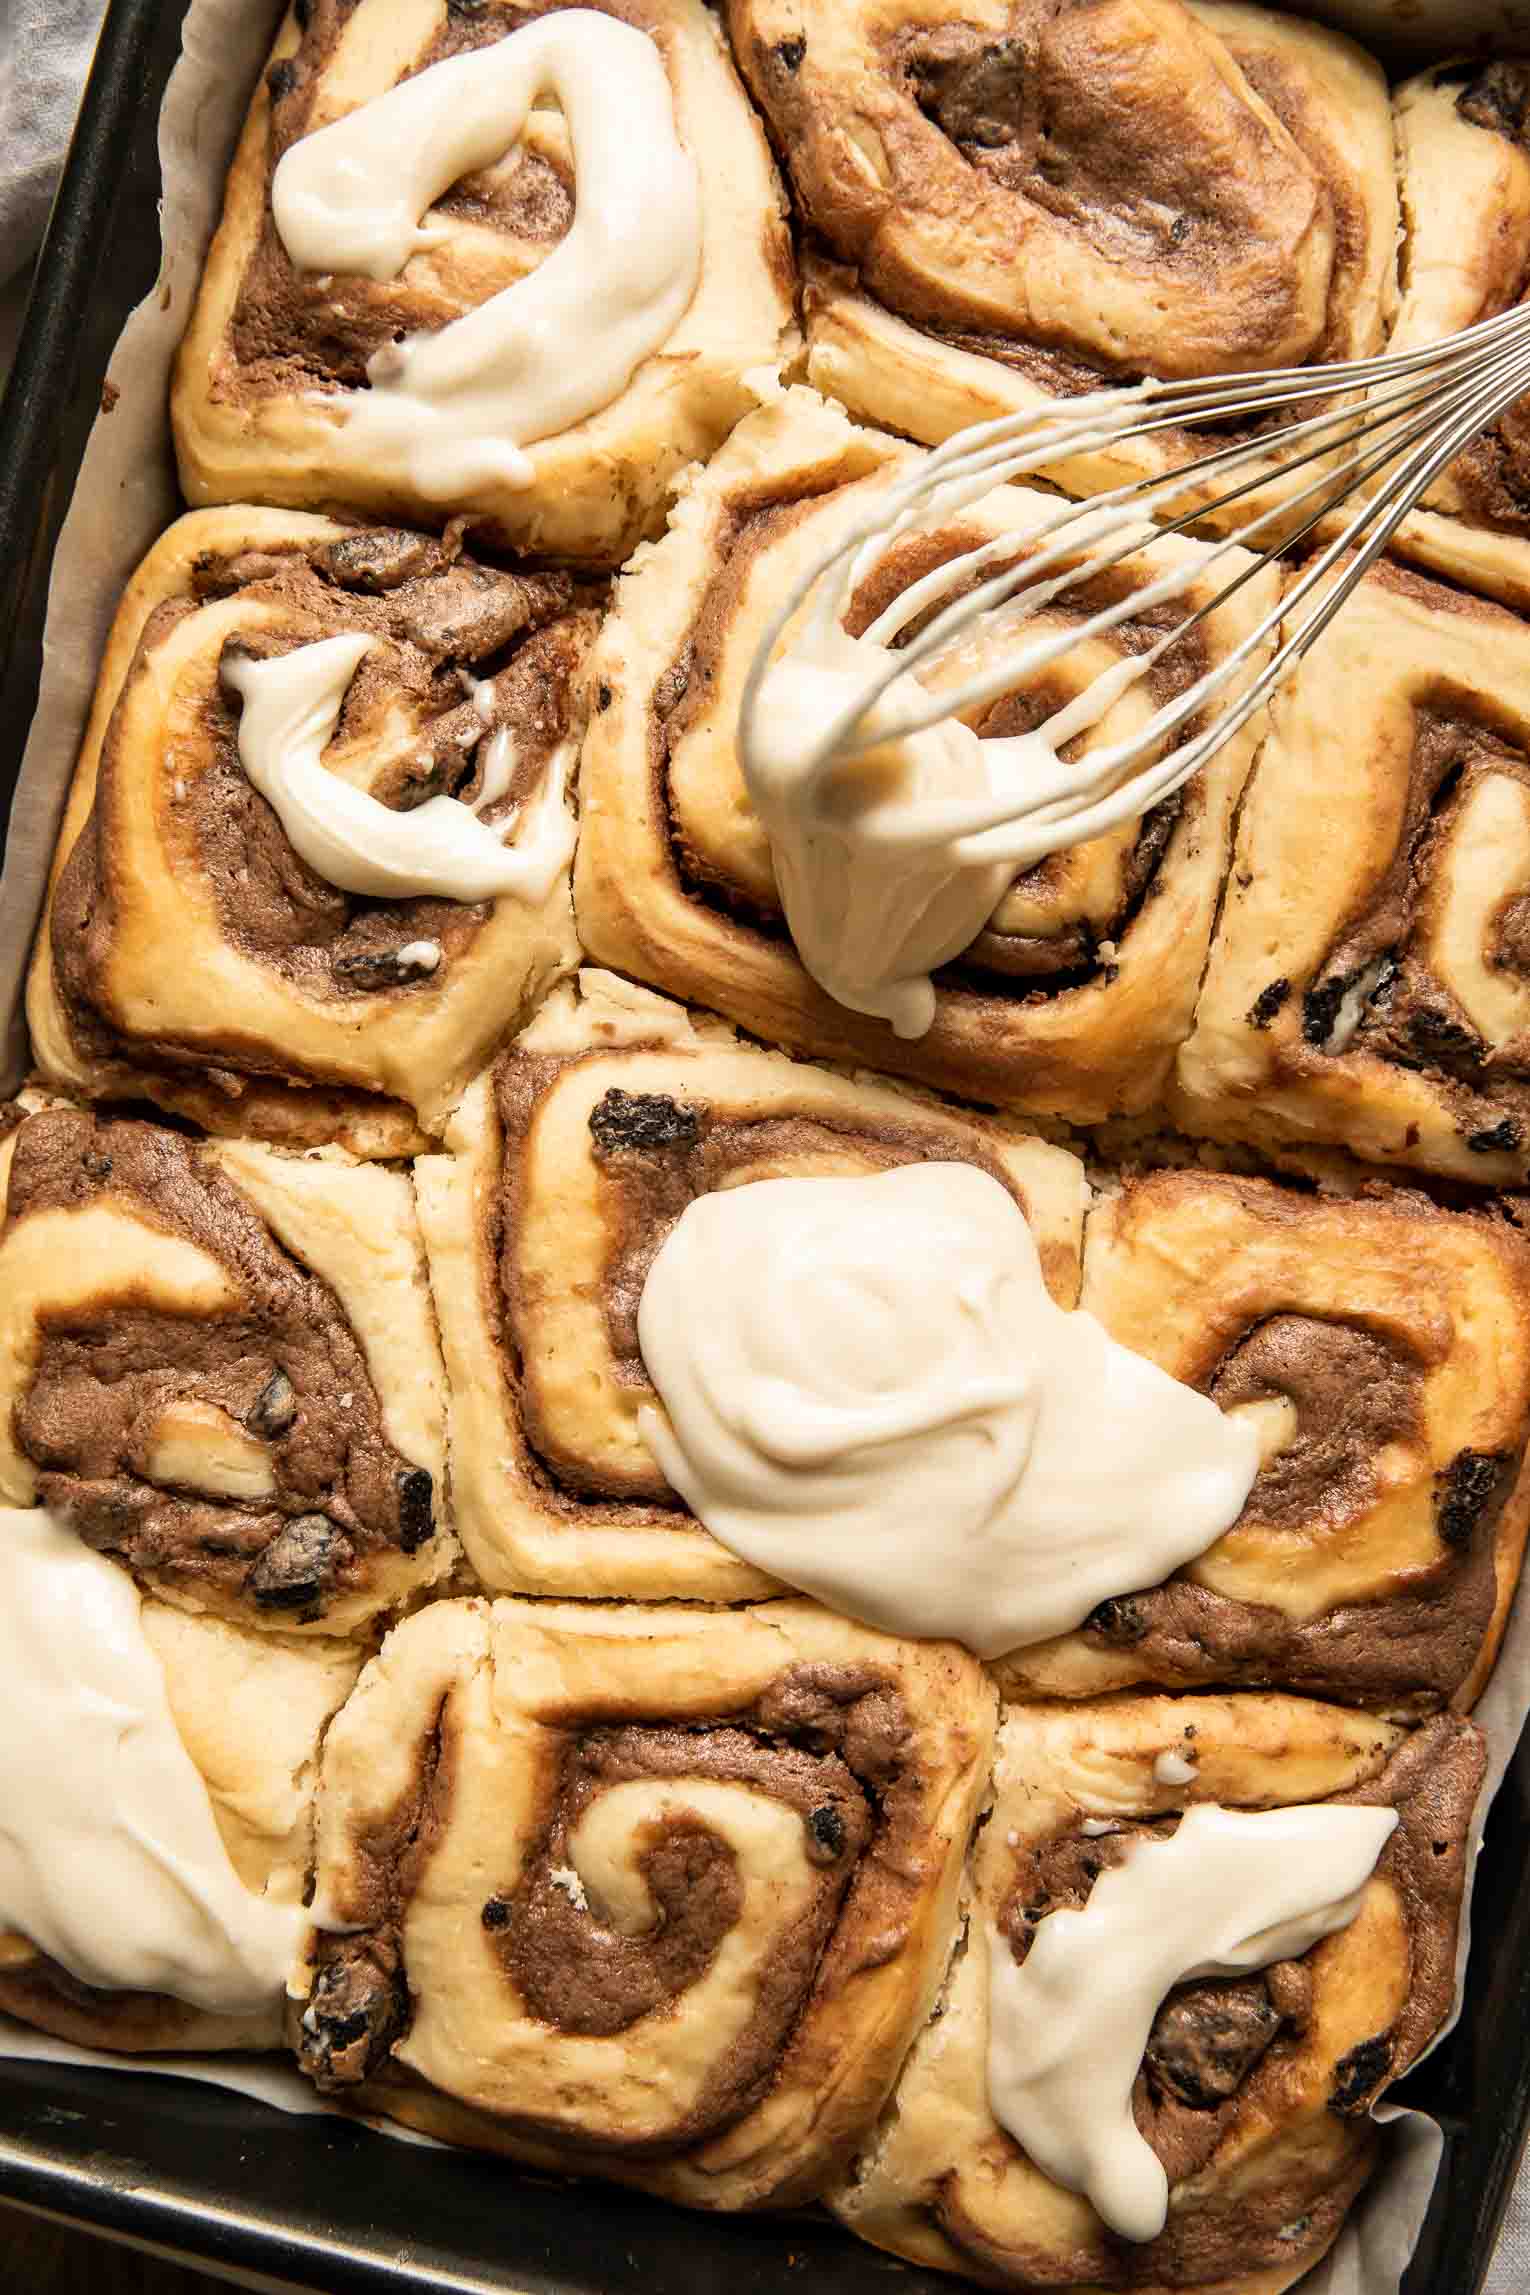 Icing being poured on cinnamon rolls.